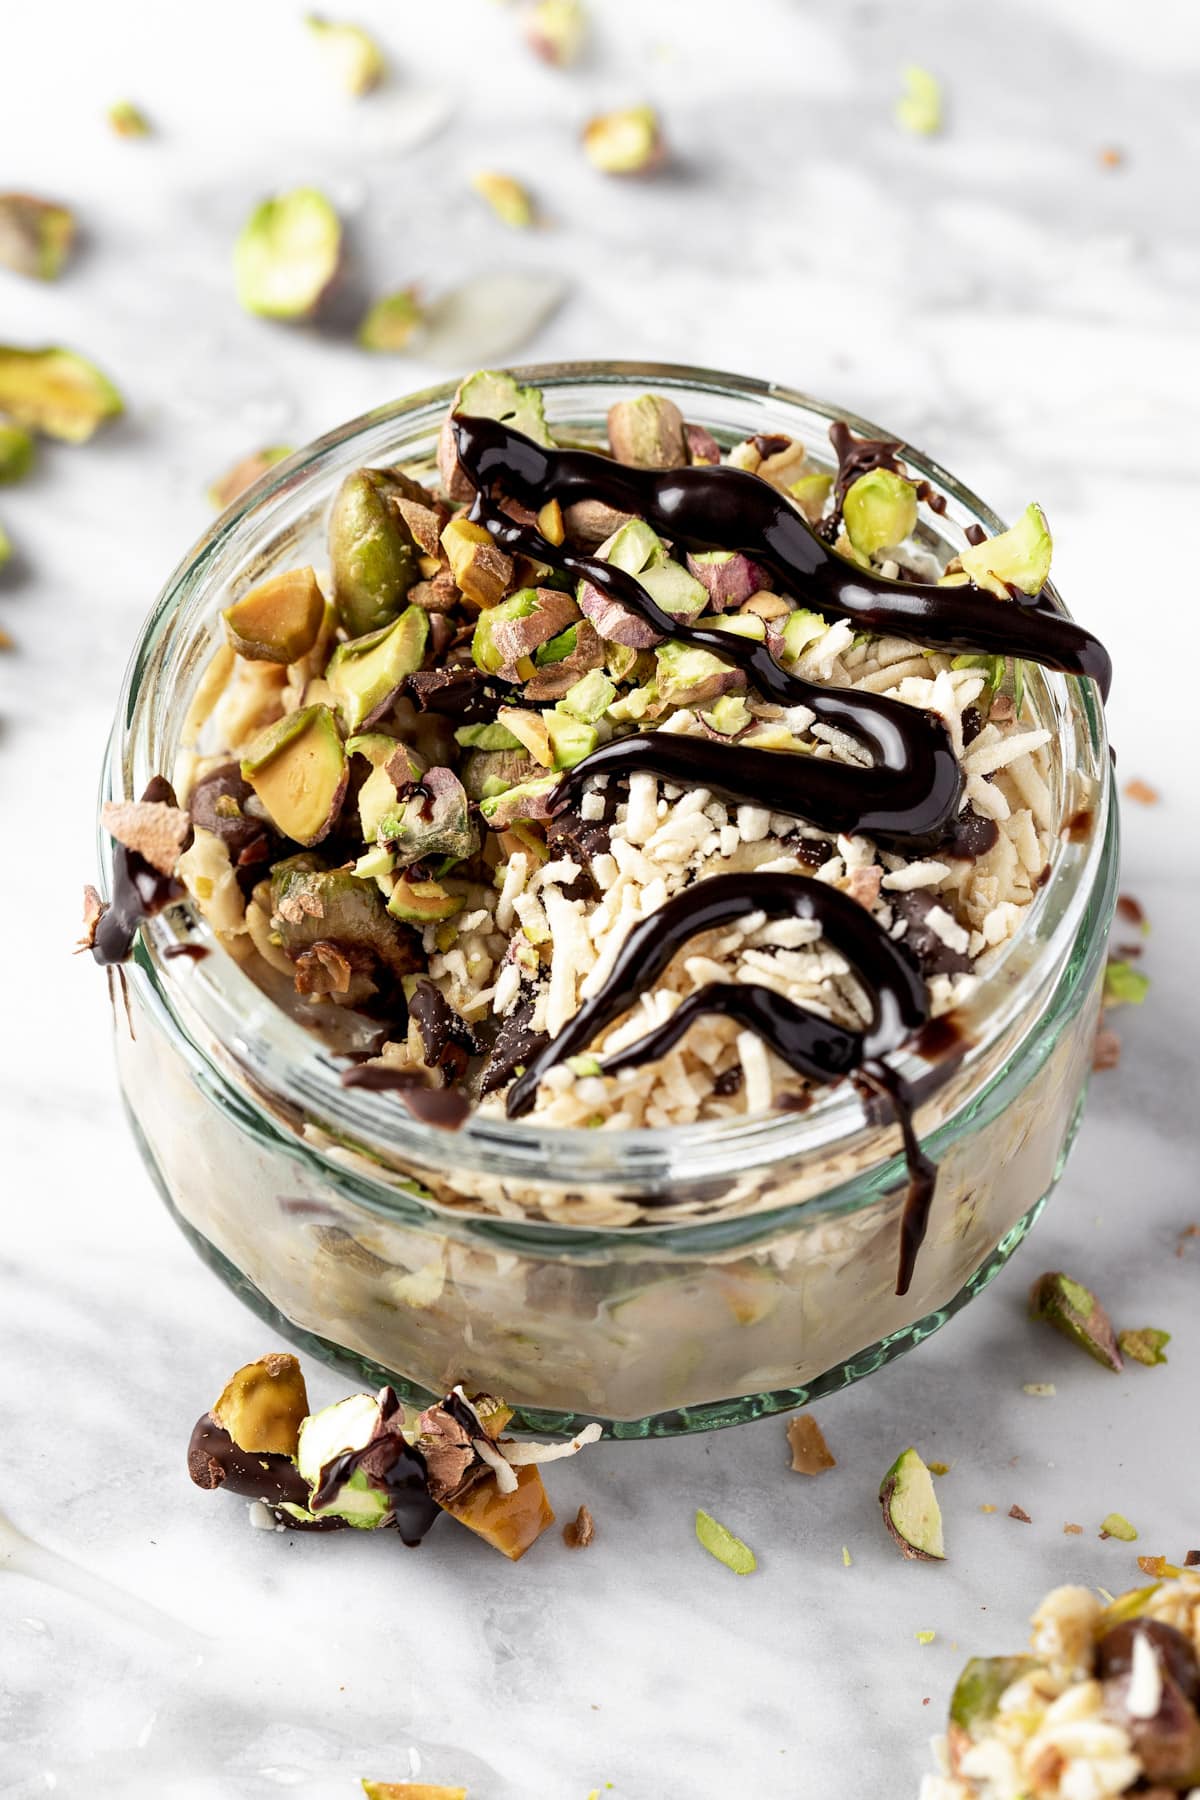 Pistachio overnight oats in a small glass jar, with a bite missing.